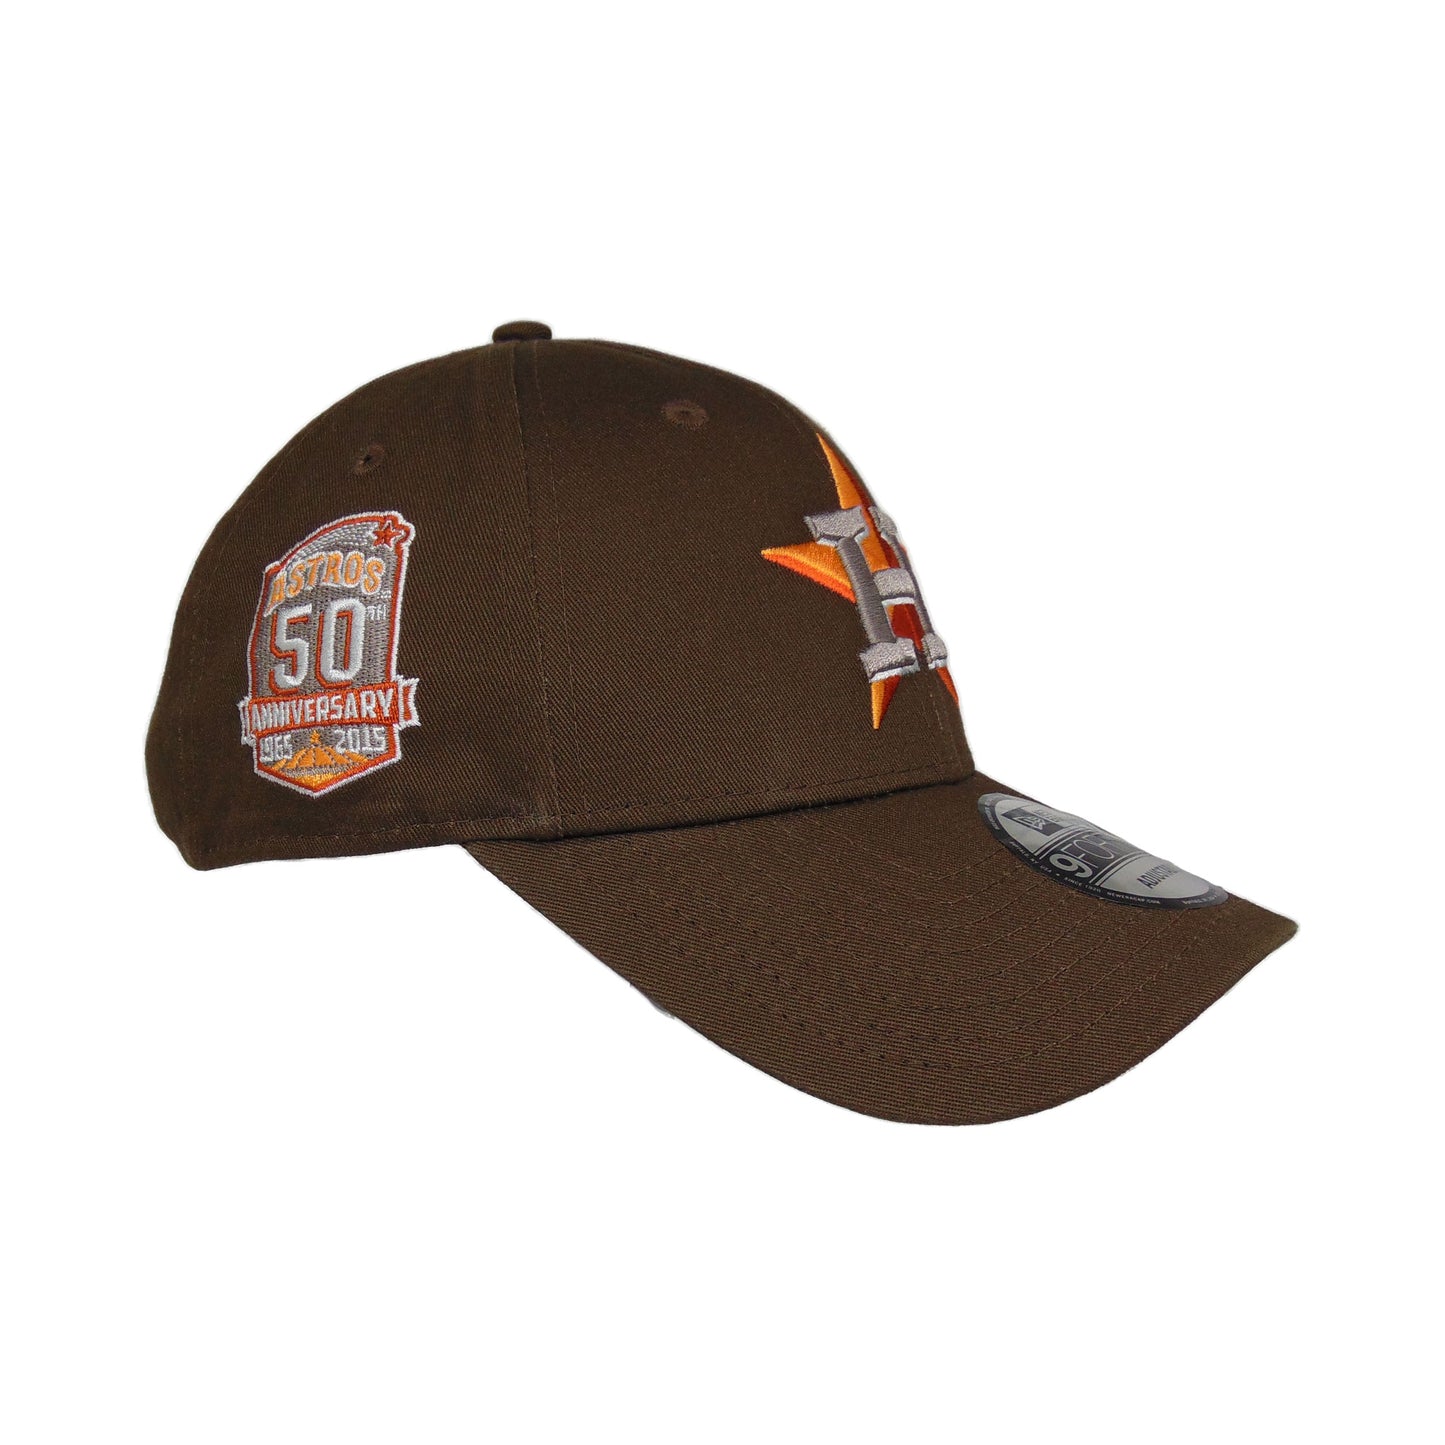 Houston Astros 9FORTY New Era Cap brown Patch